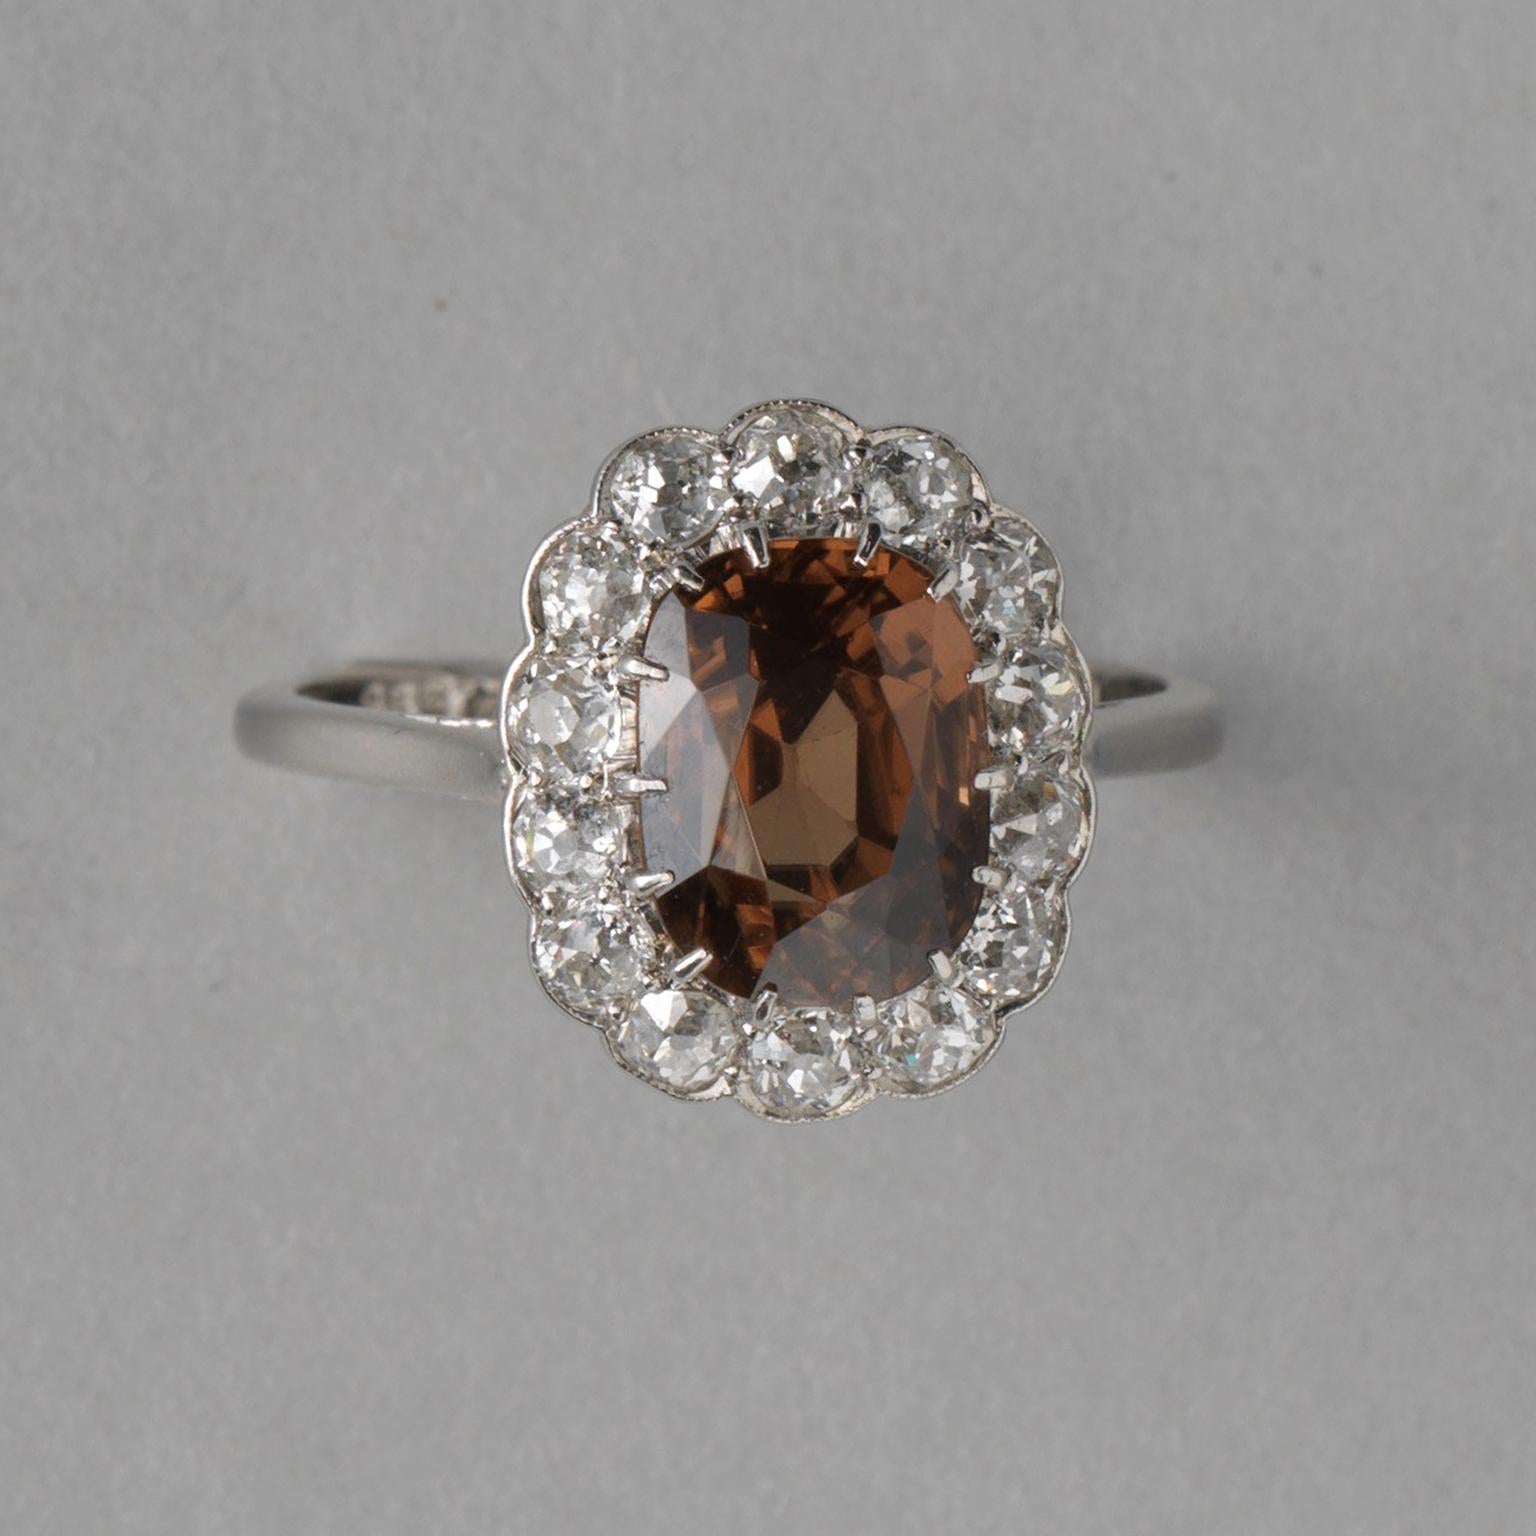 A platinum Edwardian cluster ring set with a brown oval facetted zircon (app. 2.27 carat) surrounded by old cut diamonds (app. 0.89 carat), numbered: U4598, England, circa 1910.

ring size: 18.5 mm / 8.5 US.
weight: 5.22 grams
dimensions zircon: 10